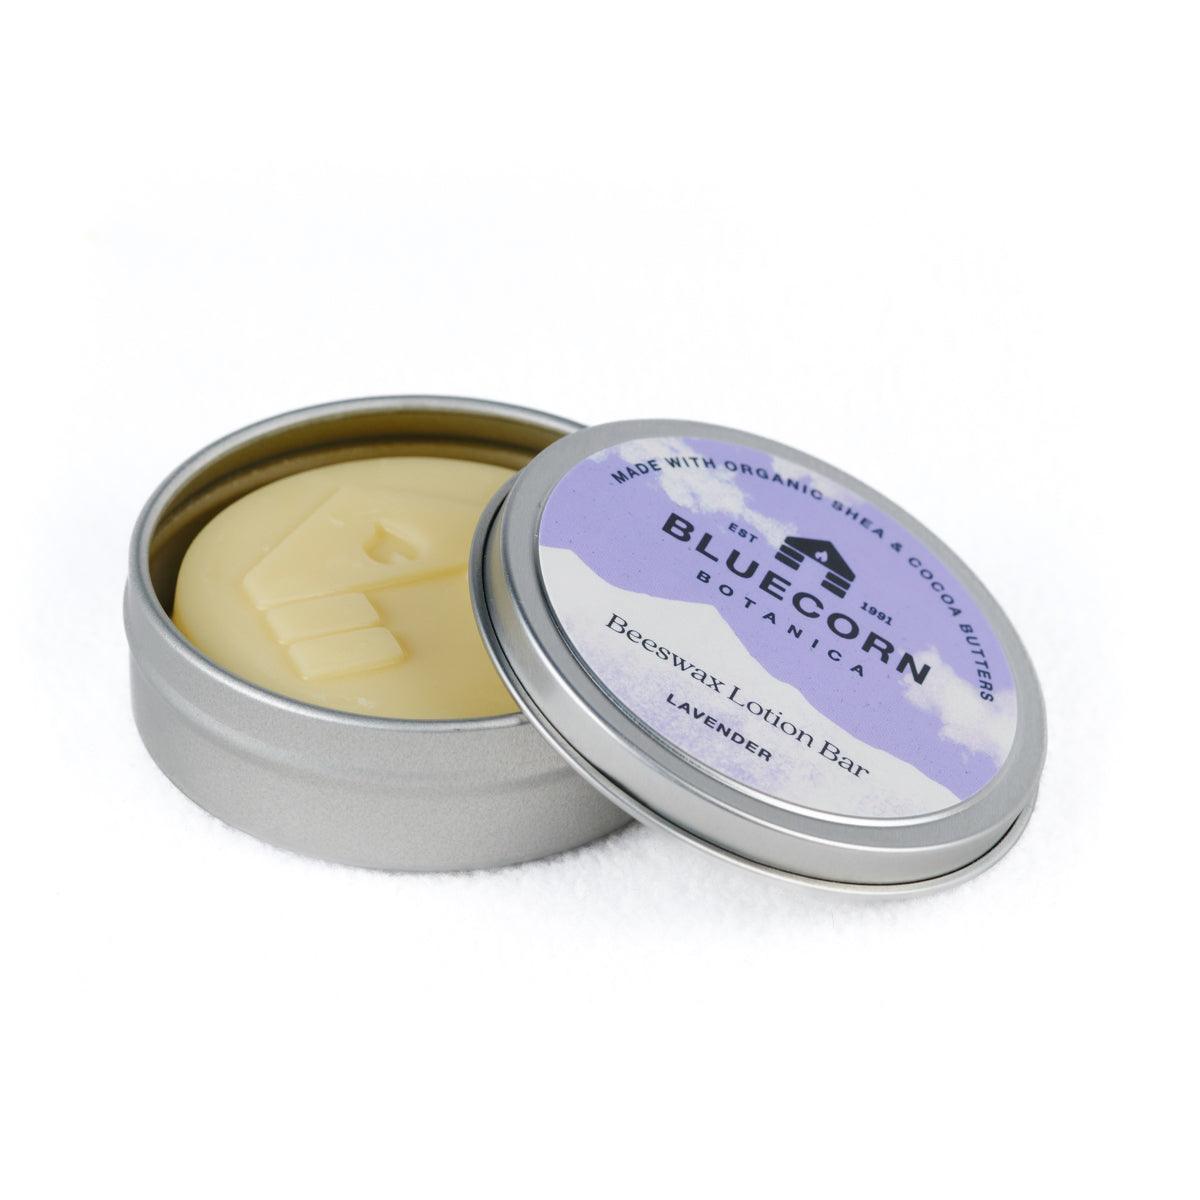 Bluecorn Botanica Beeswax Lotion Bar in Lavender. Made with Organic Shea Butter, Organic Cocoa Butter, Avocado Oil, Apricot Oil, Cappings Beeswax, Essential Oils. Using the warmth of your hands, these solids bars will turn into lotions. Can be used all over the body and come in a convenient tin. Features Purple Bluecorn Botanica Label on aluminum tin with opened lid showing lotion bar. Lotion bar is cream in color and features Bluecorn cabin. 